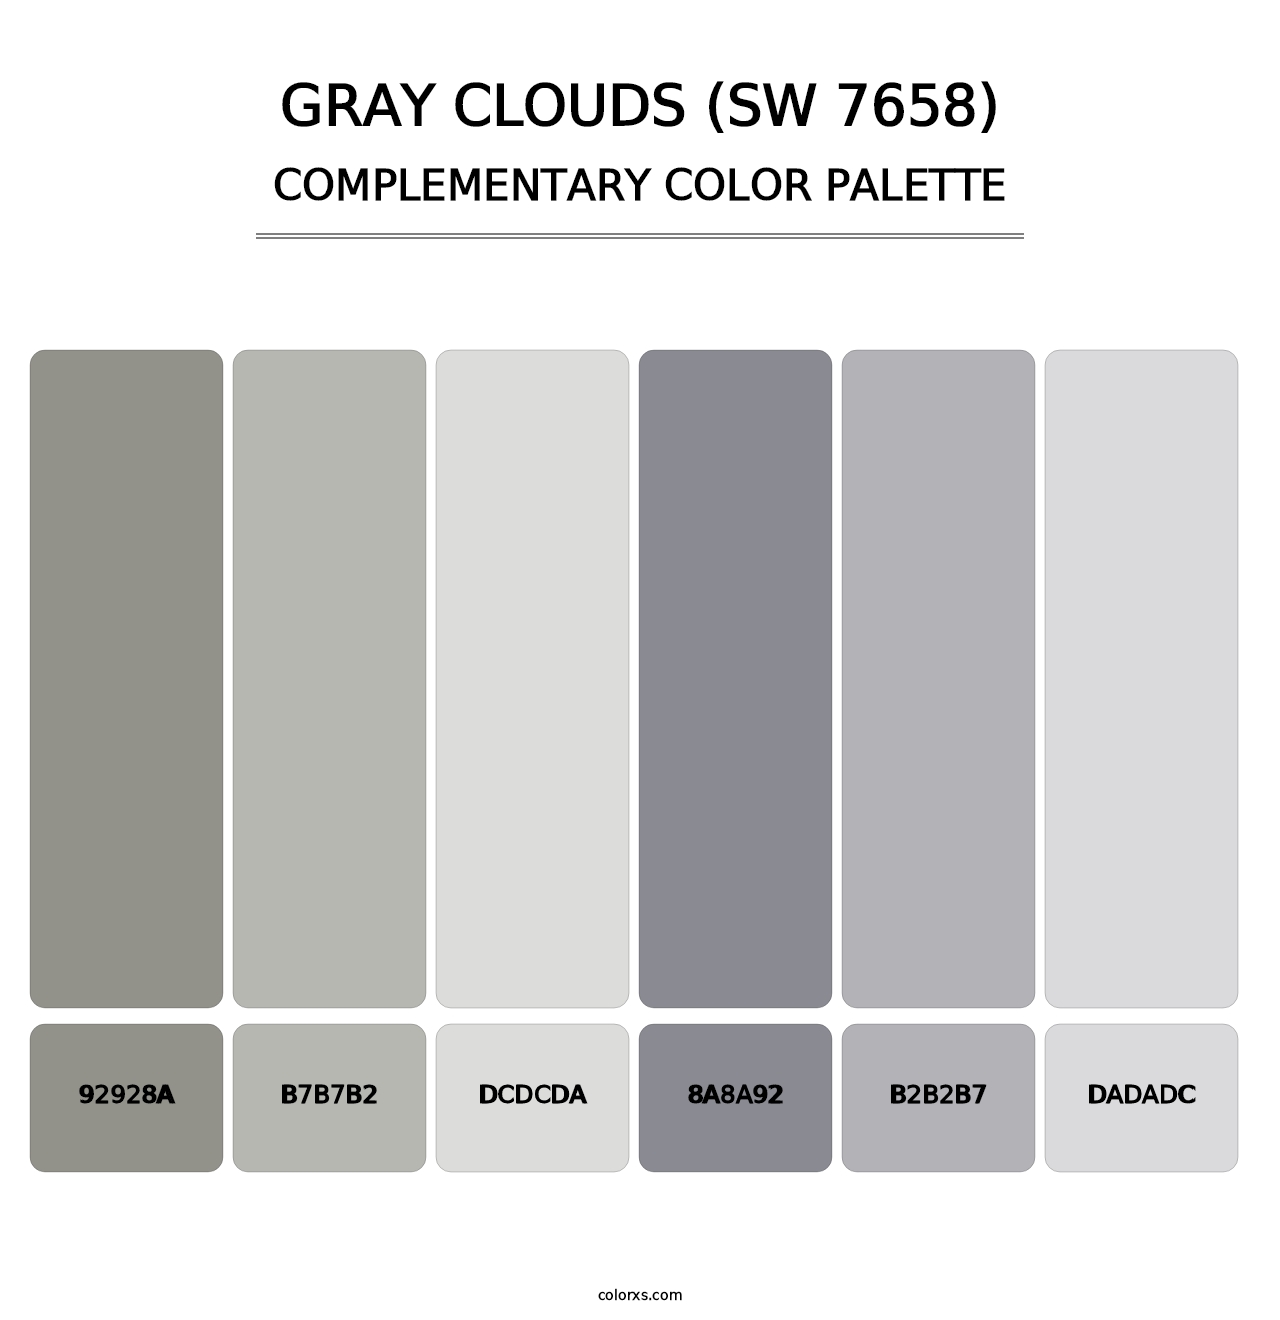 Gray Clouds (SW 7658) - Complementary Color Palette